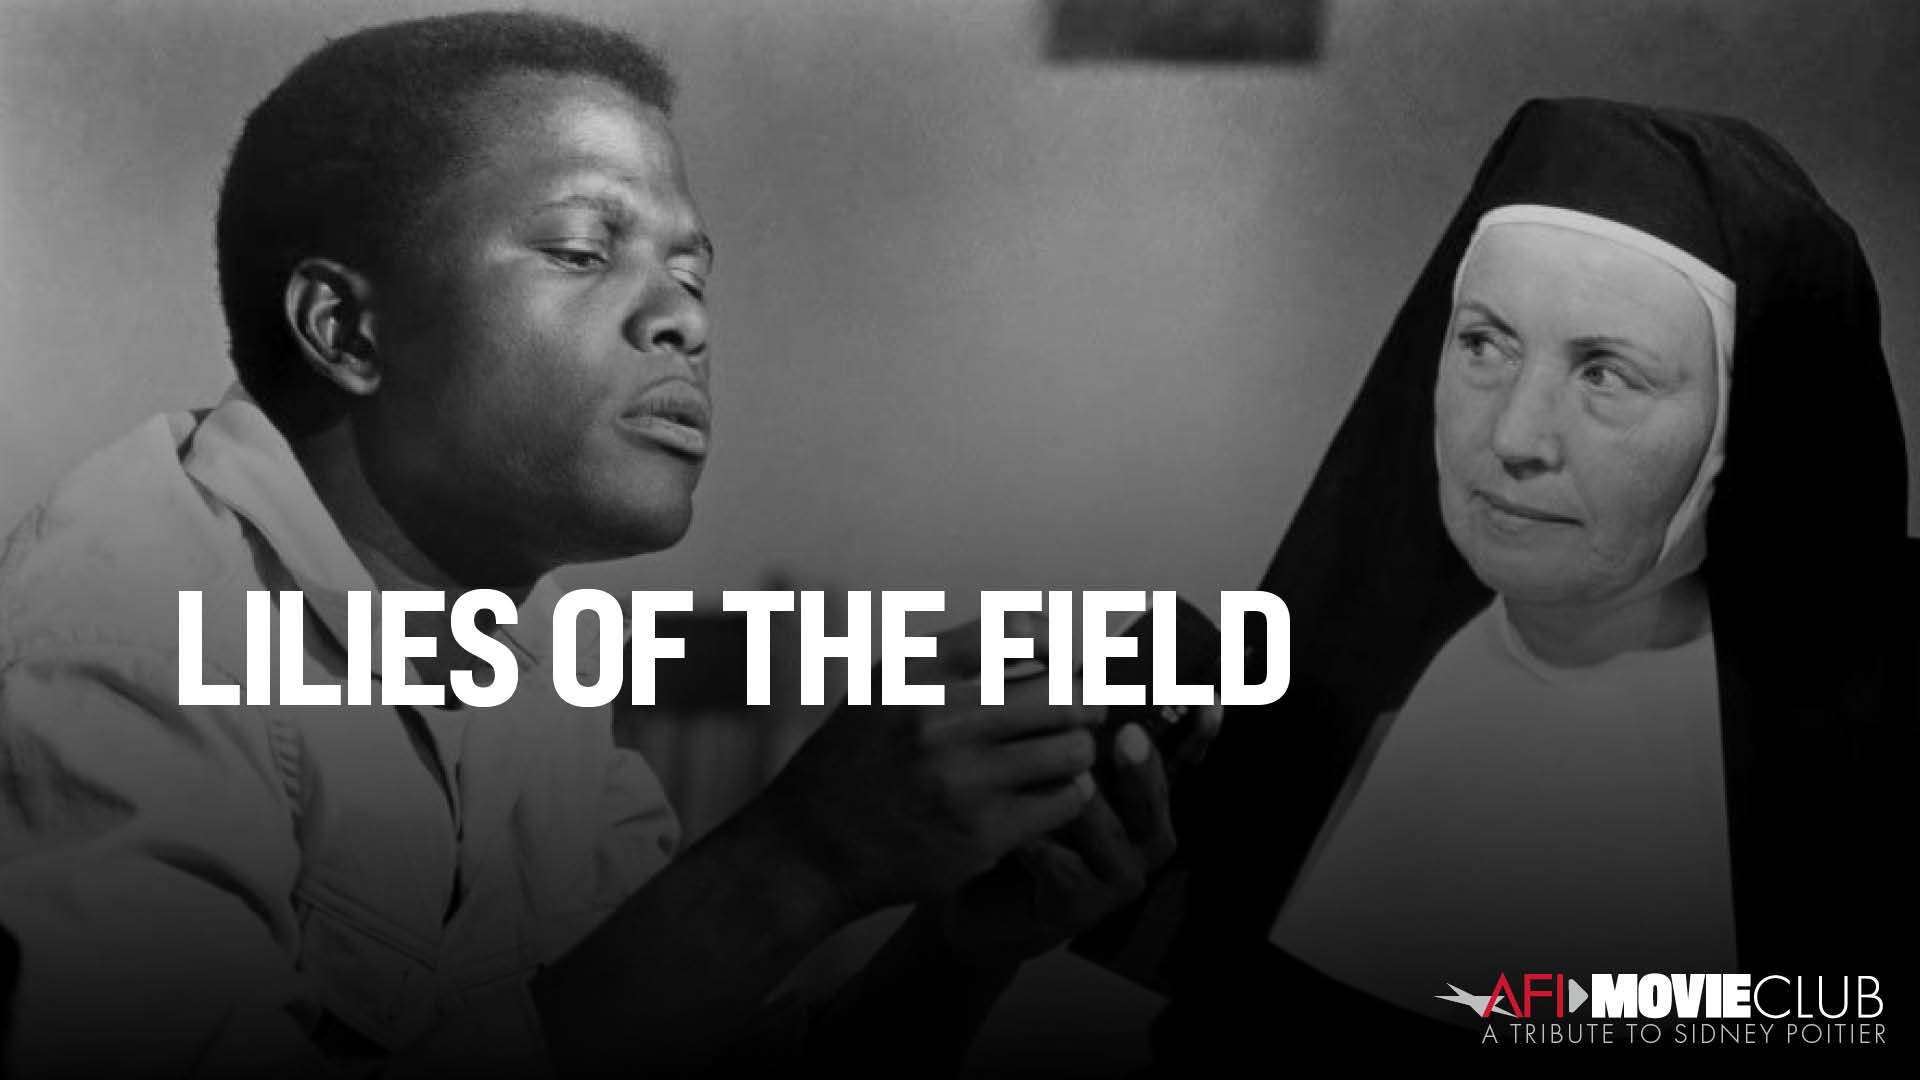 Lilies of the Field Film Still - Sidney Poitier and Lilia Skala